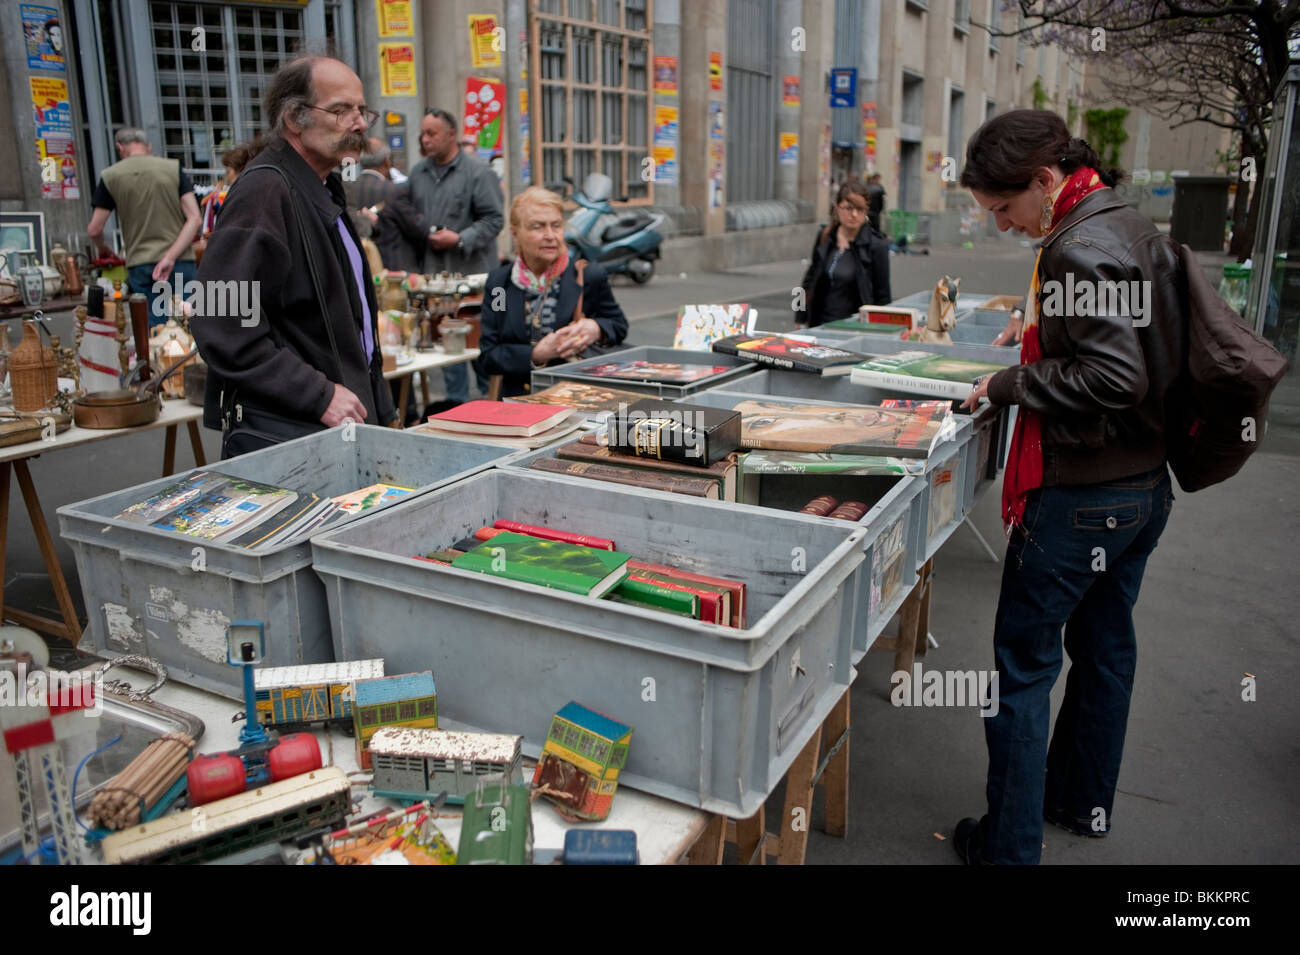 People Shopping for 'Second Hand' Household Objects on Street Garage Sale, Paris, France Stock Photo